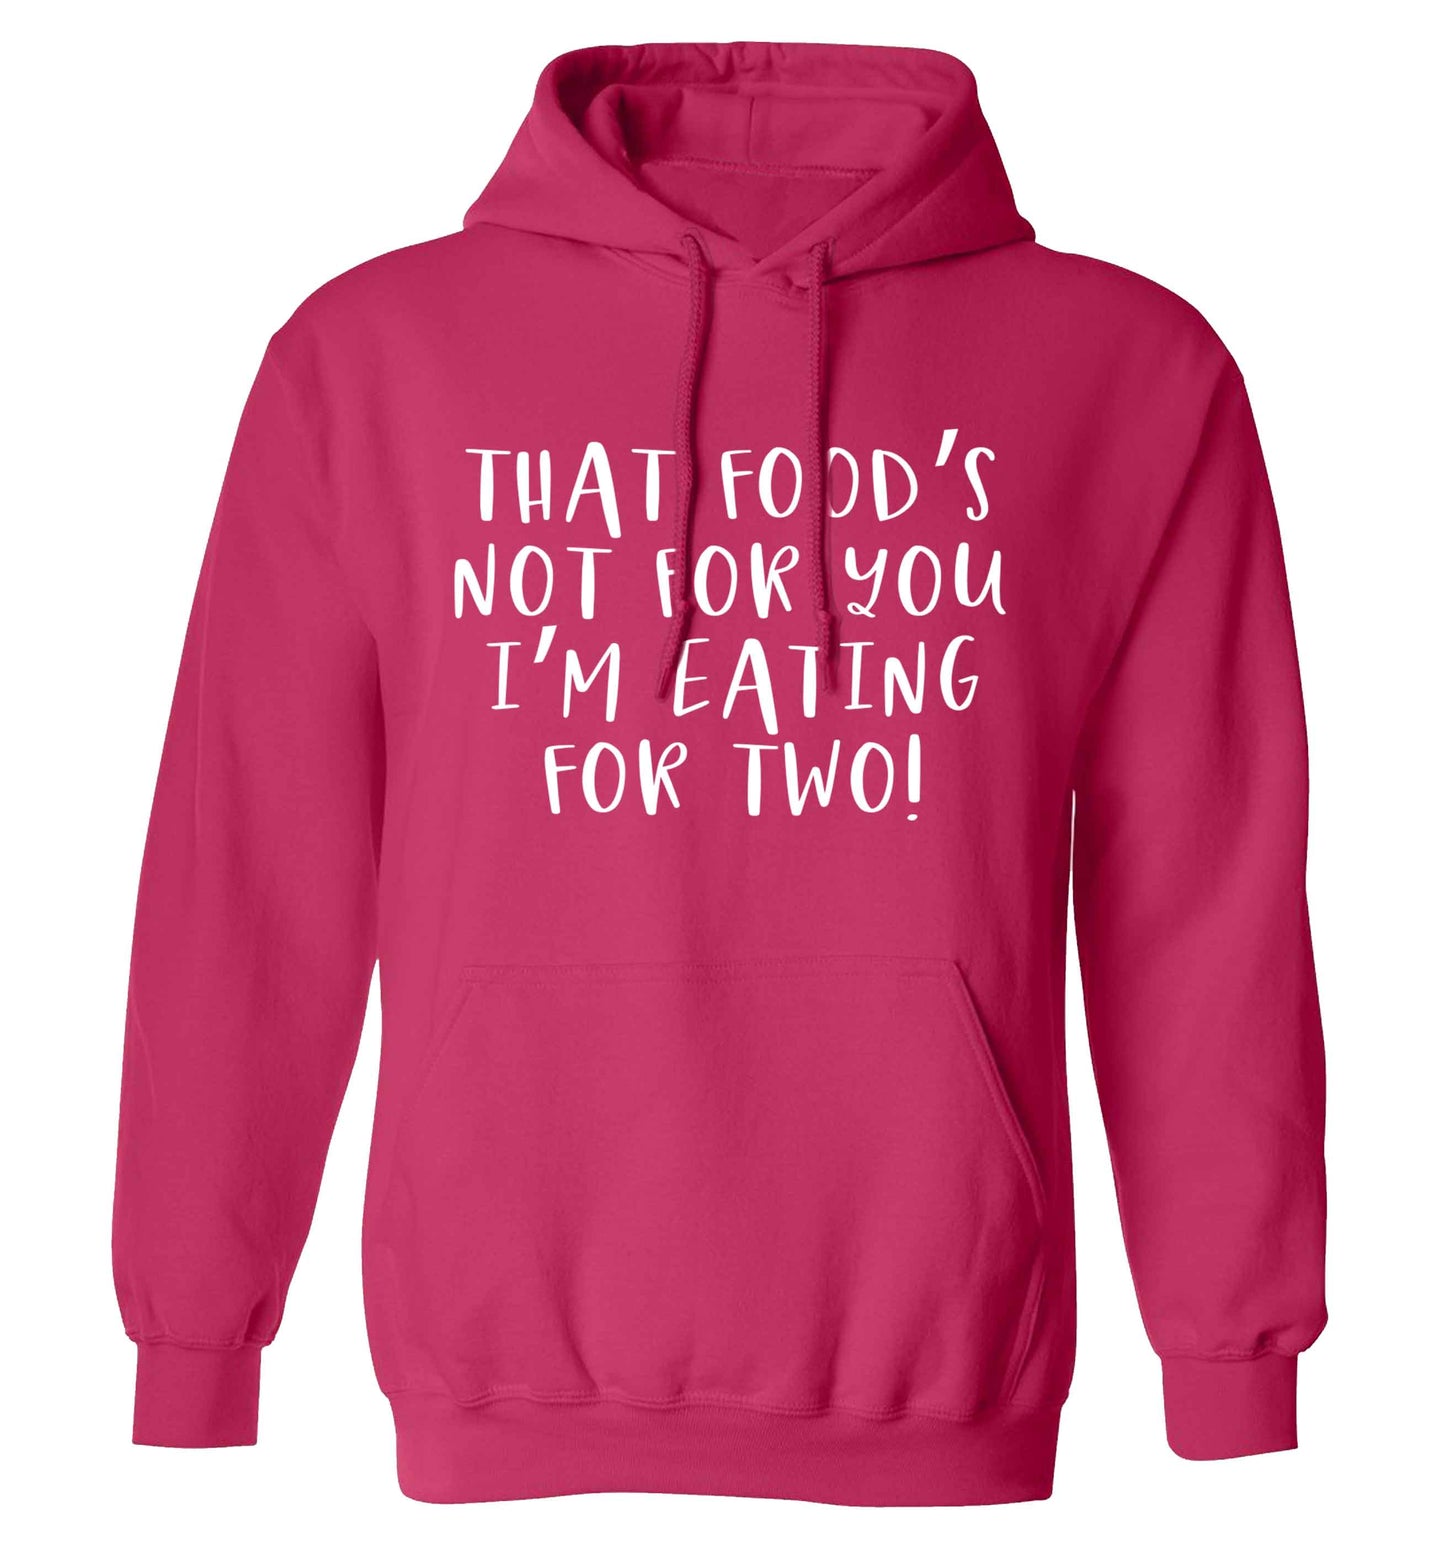 That food's not for you I'm eating for two adults unisex pink hoodie 2XL